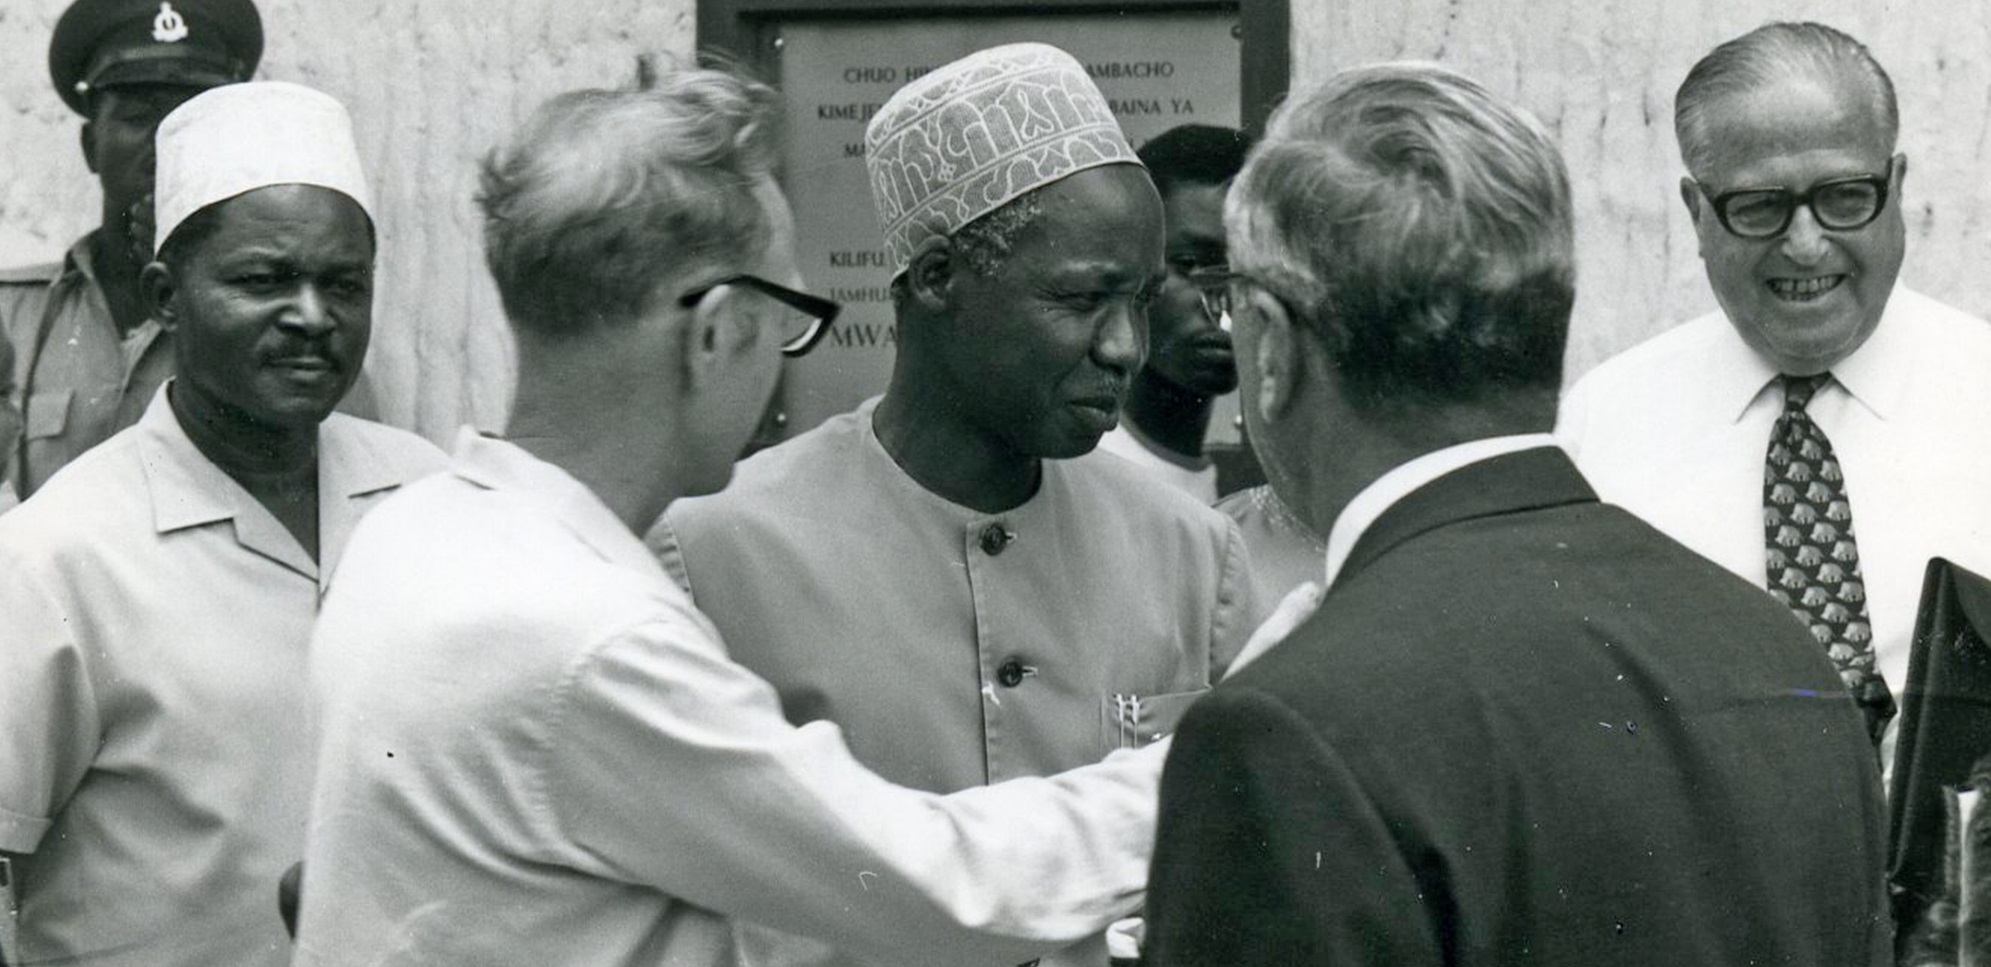 COMMEMORATION: We celeberate Nyerere's iconic support to Ifakara, public health research